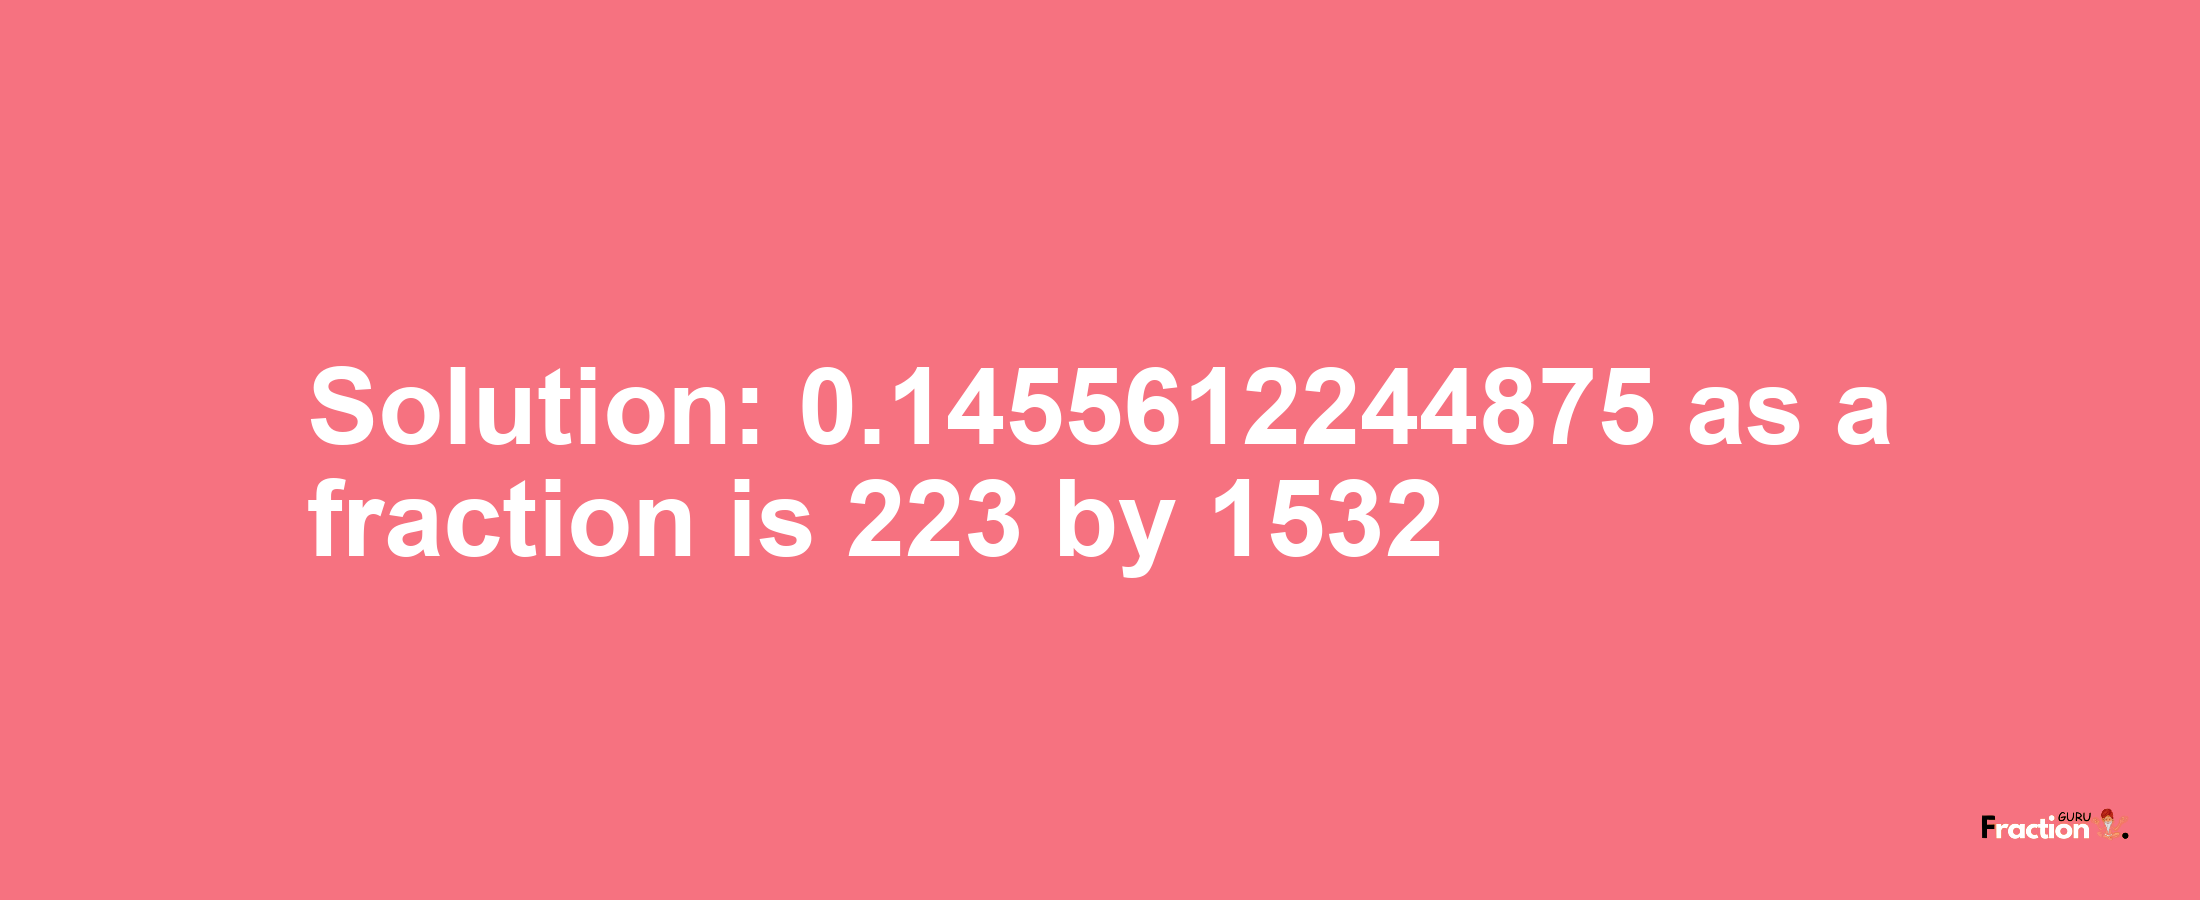 Solution:0.1455612244875 as a fraction is 223/1532